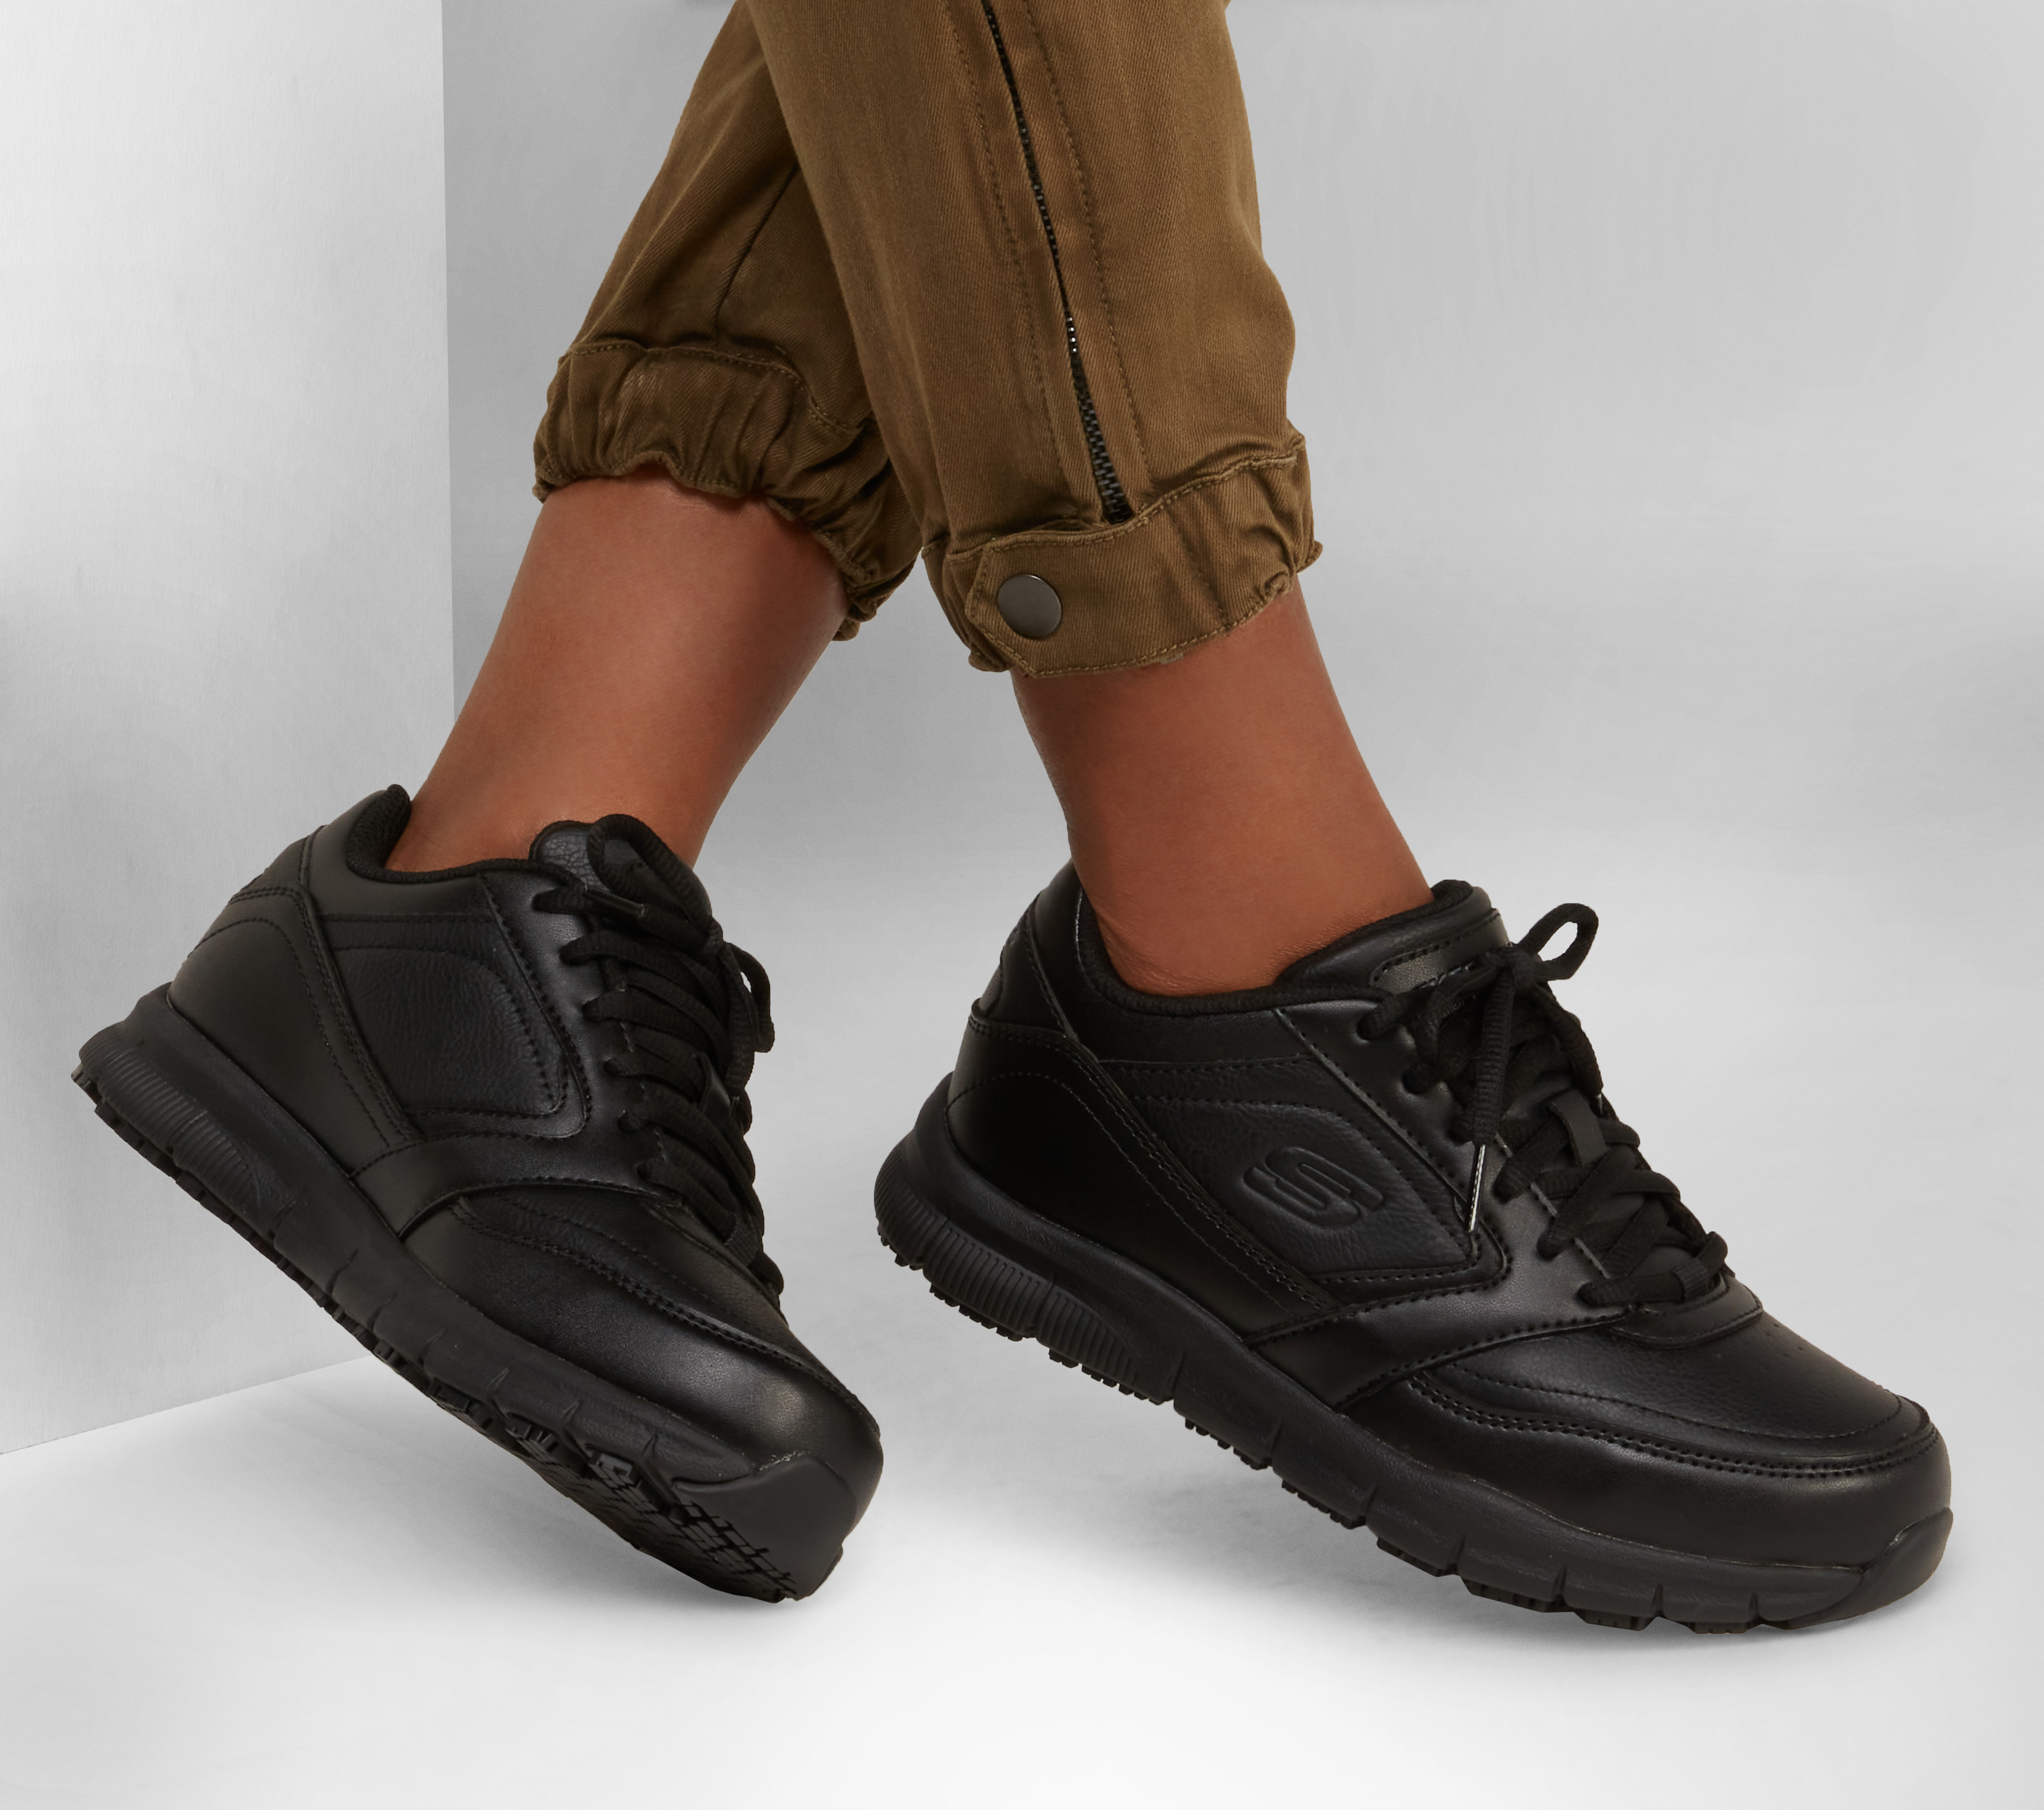 Work Relaxed Fit: Nampa - Wyola SR | SKECHERS